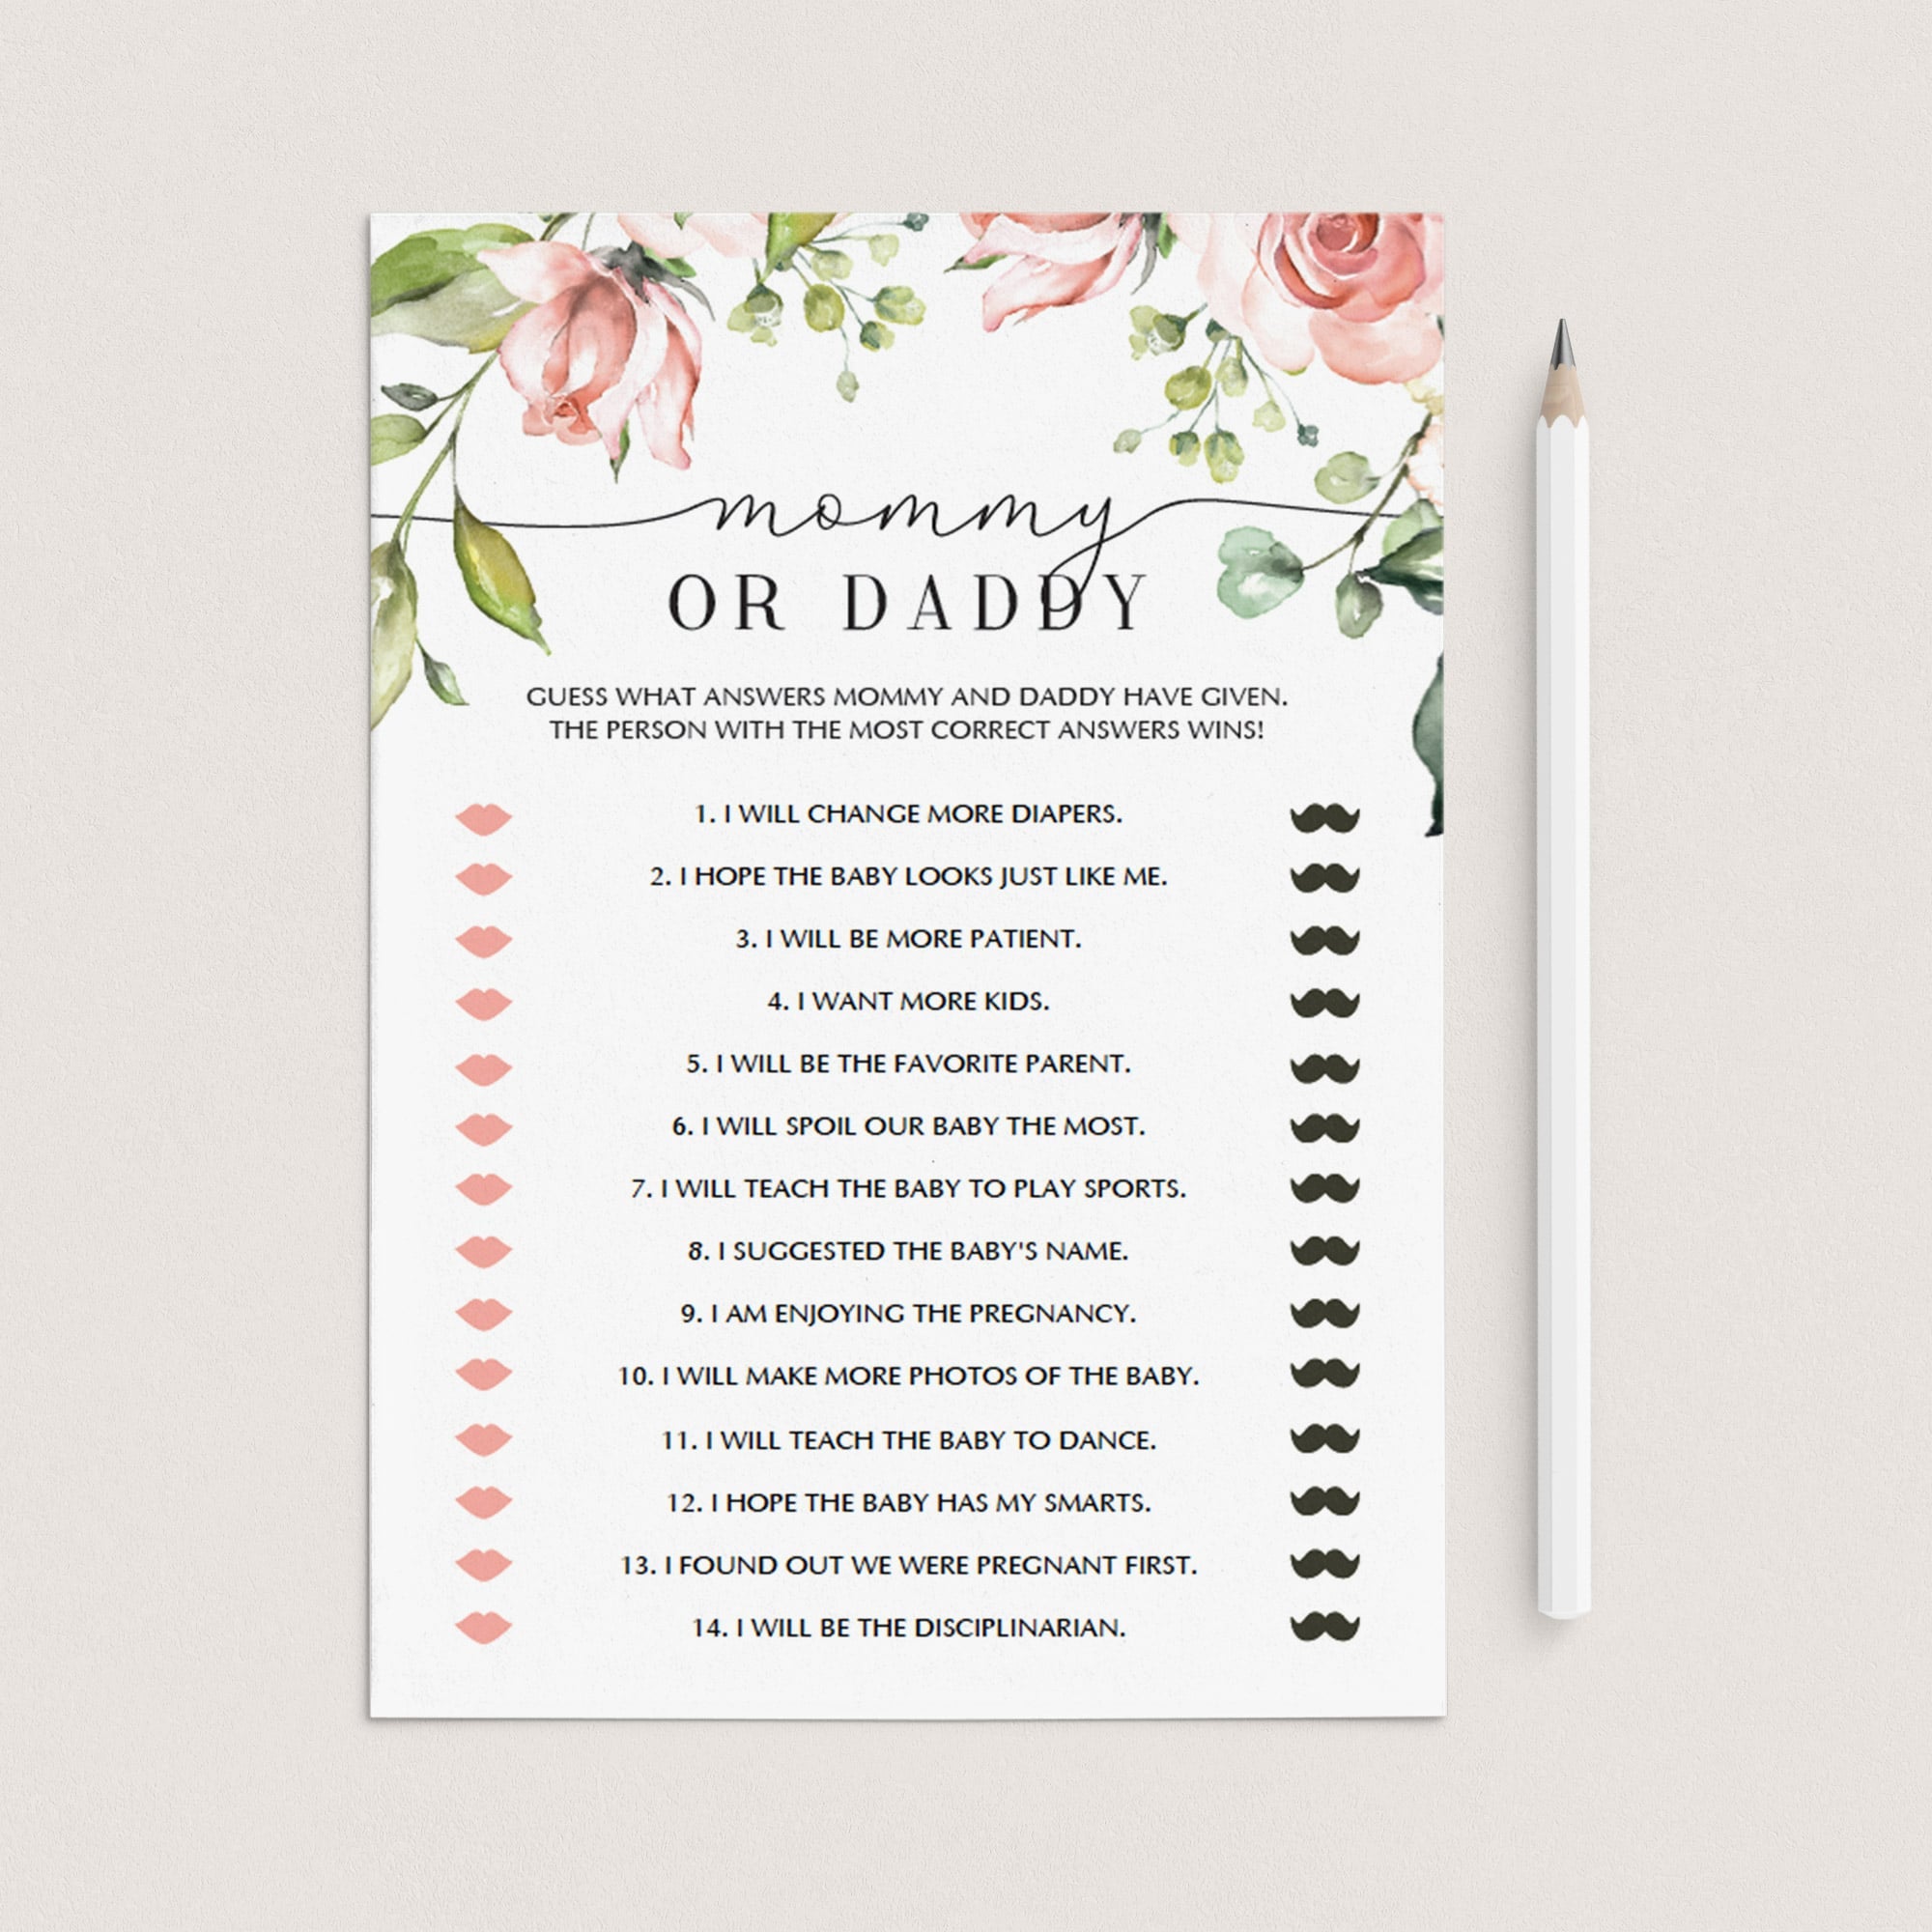 Mommy daddy baby shower game floral theme by LittleSizzle